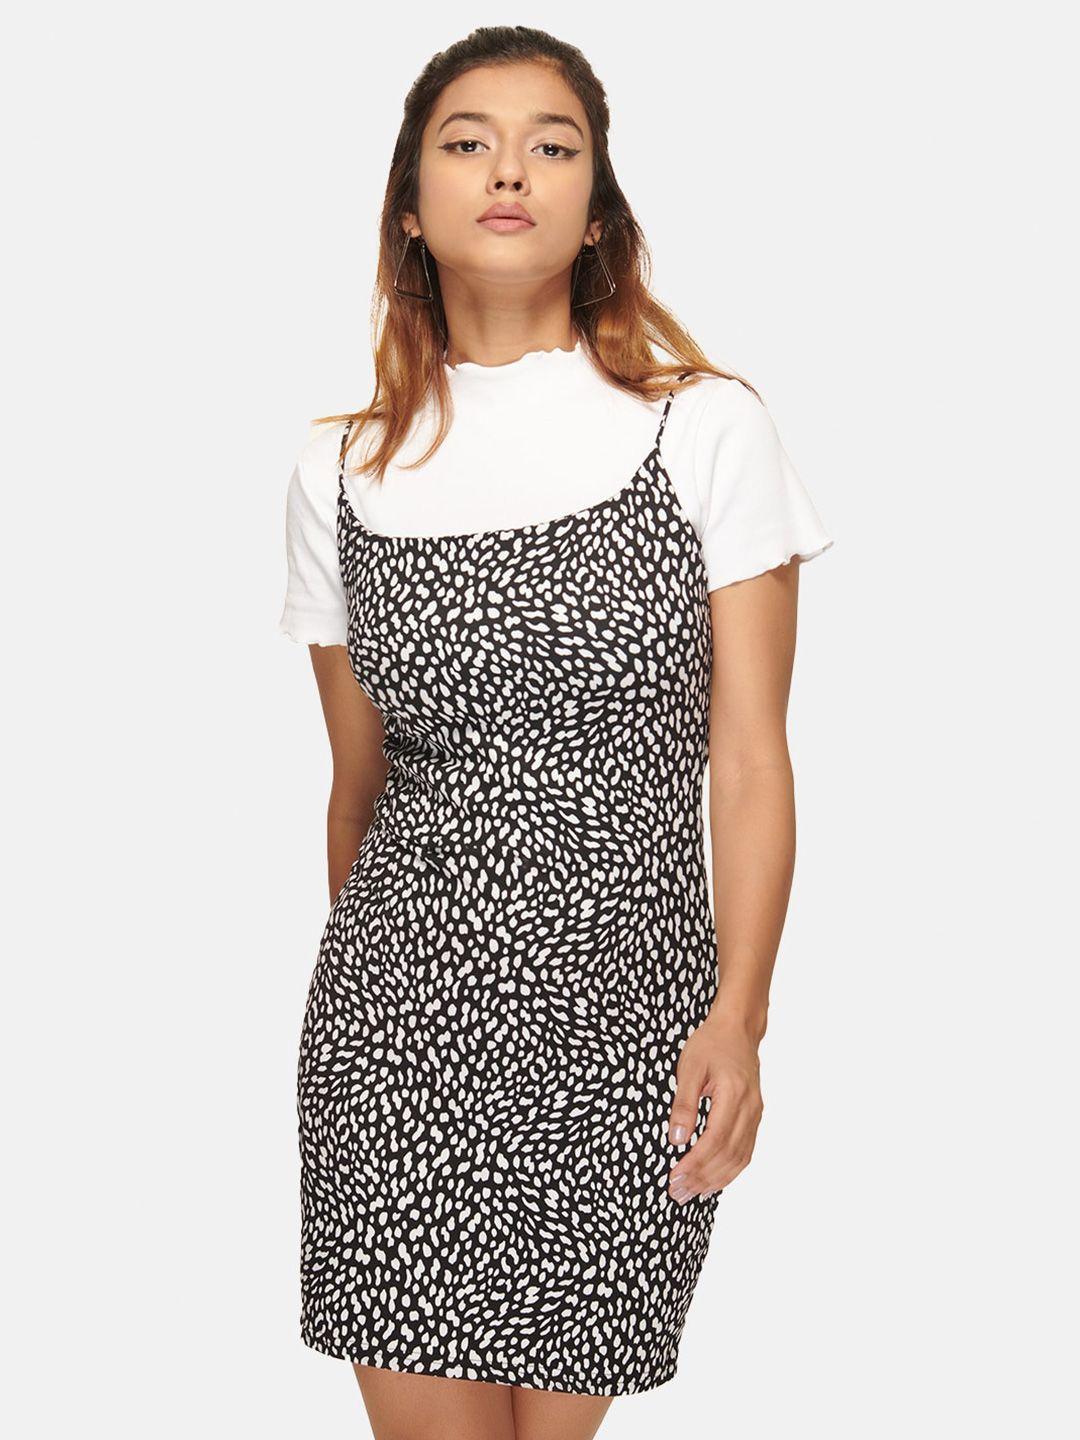 izf shoulder straps animal printed cotton pinafore dress with t-shirt